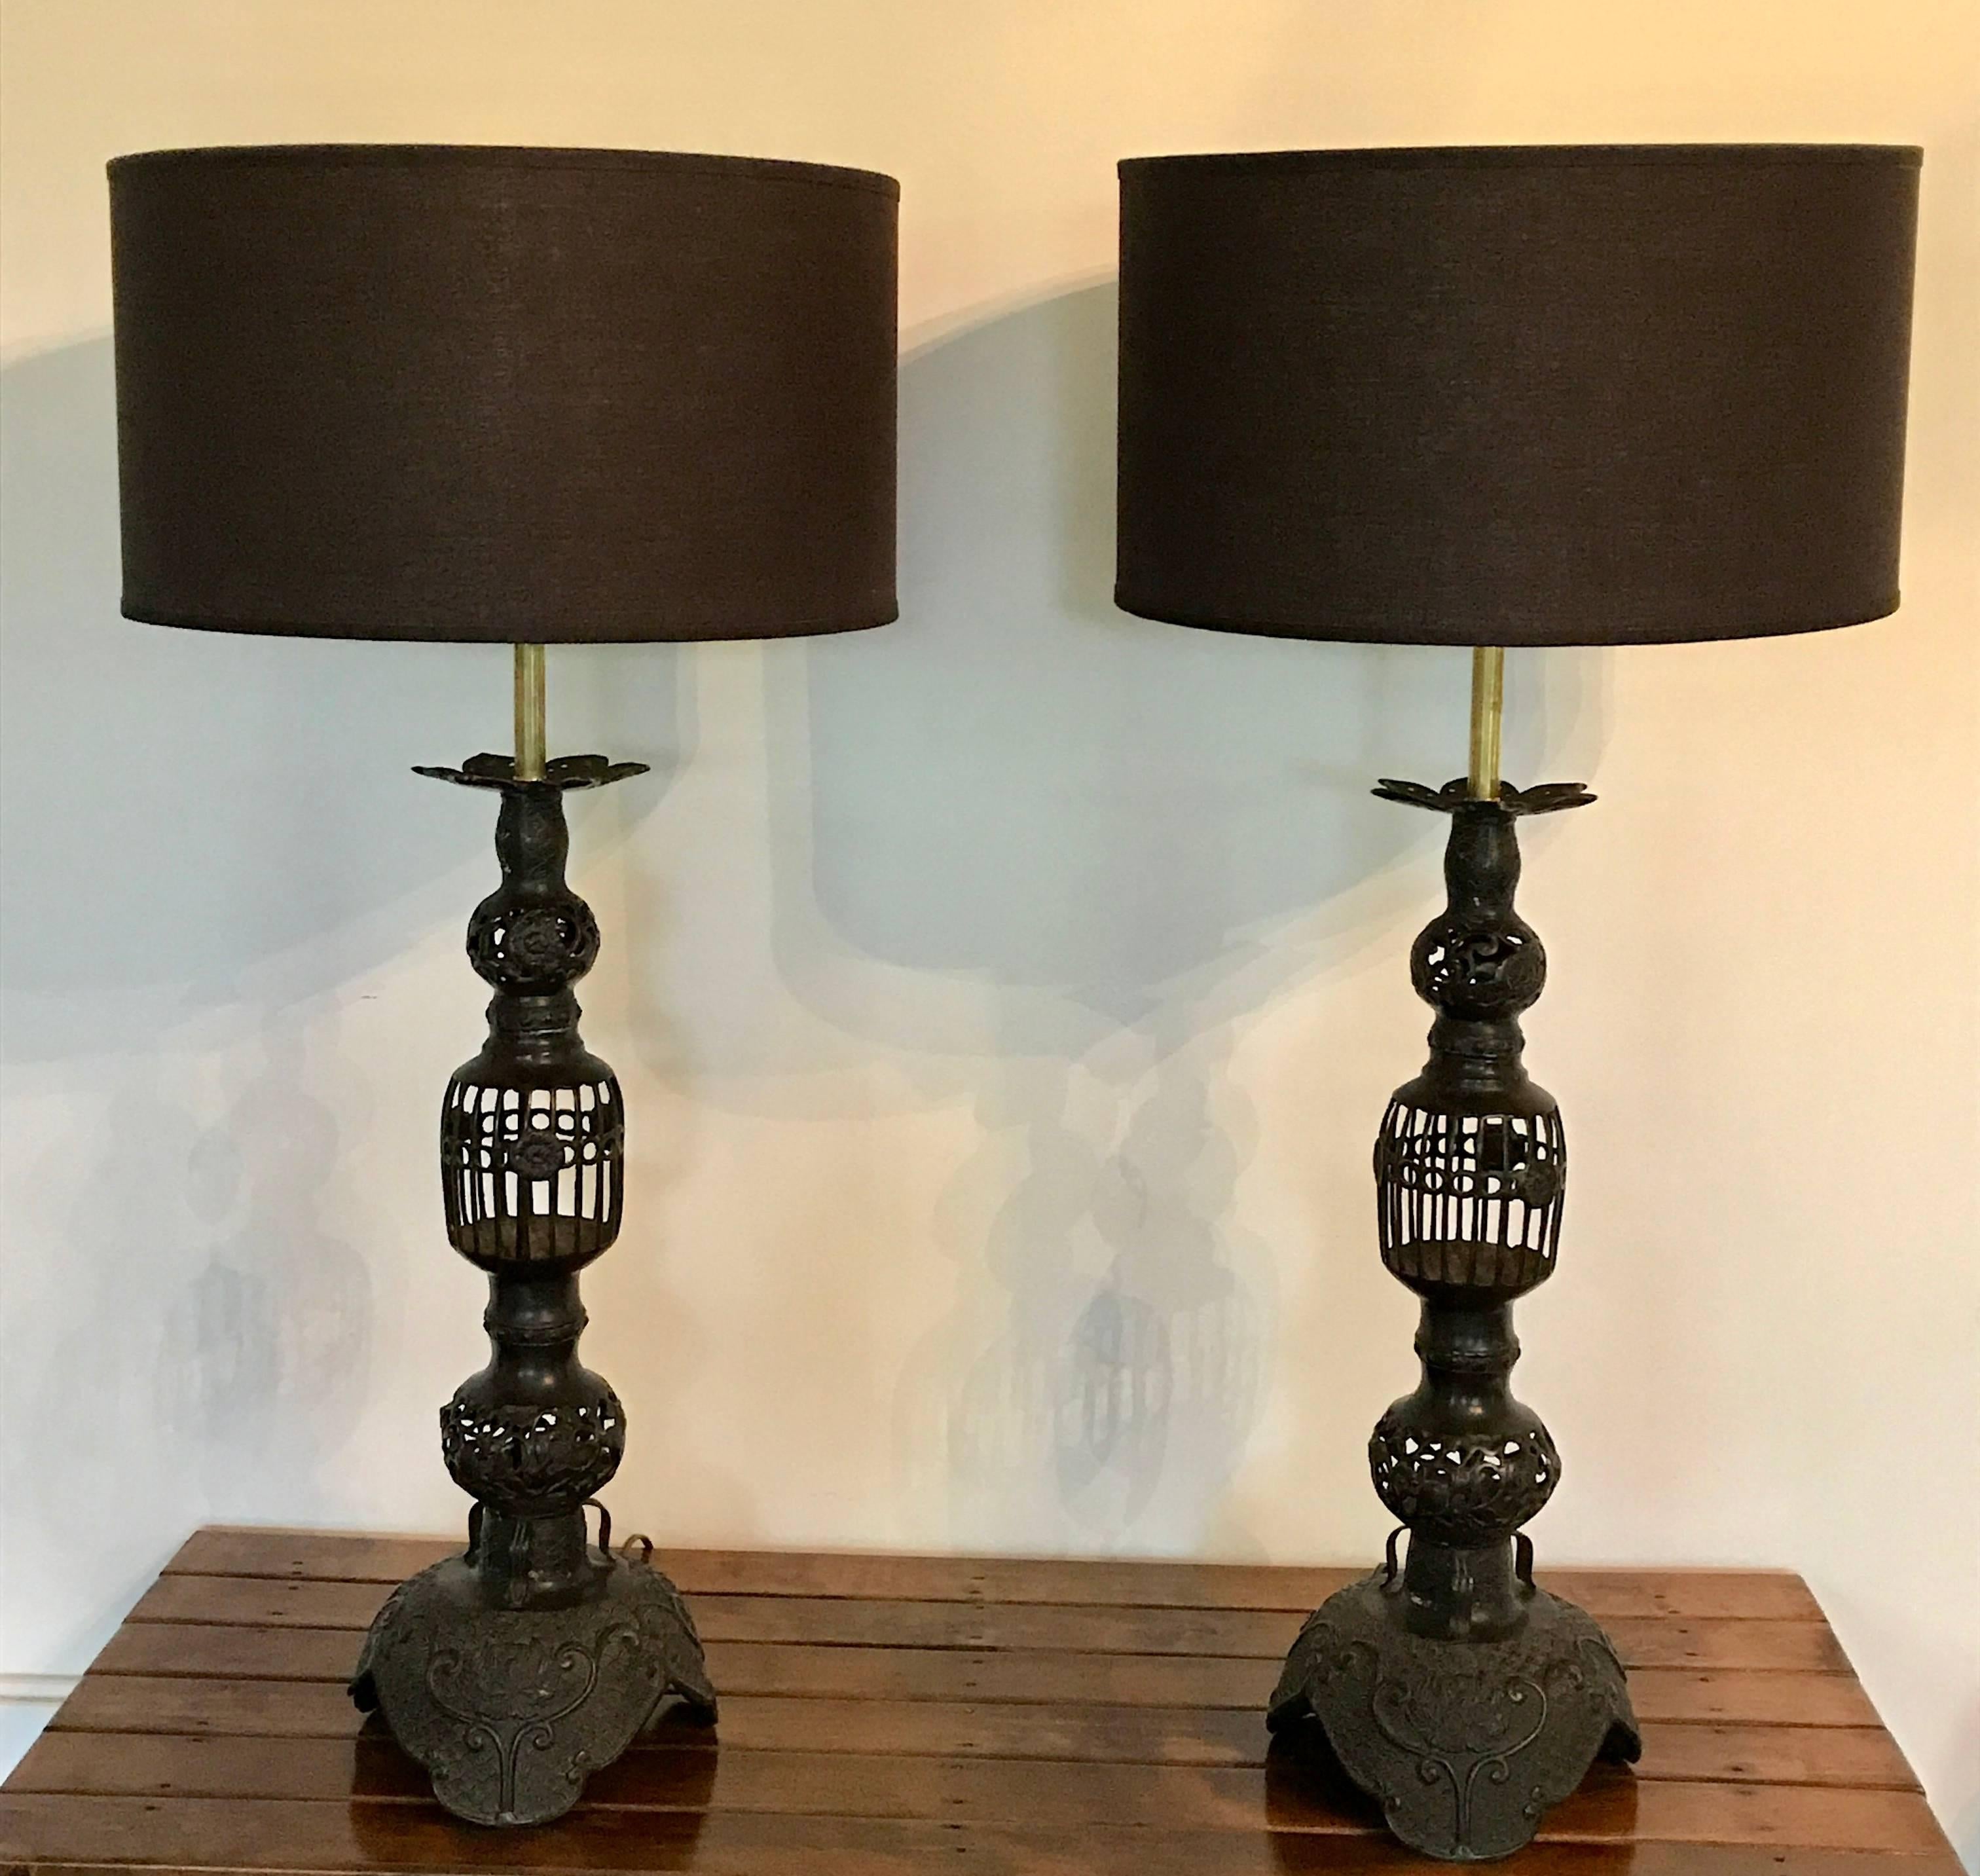 Impressive pair of Japanese candleholders made into table lamps in the mid-20th century. Recently re-wired including beautiful brass hardware. Shades not included.